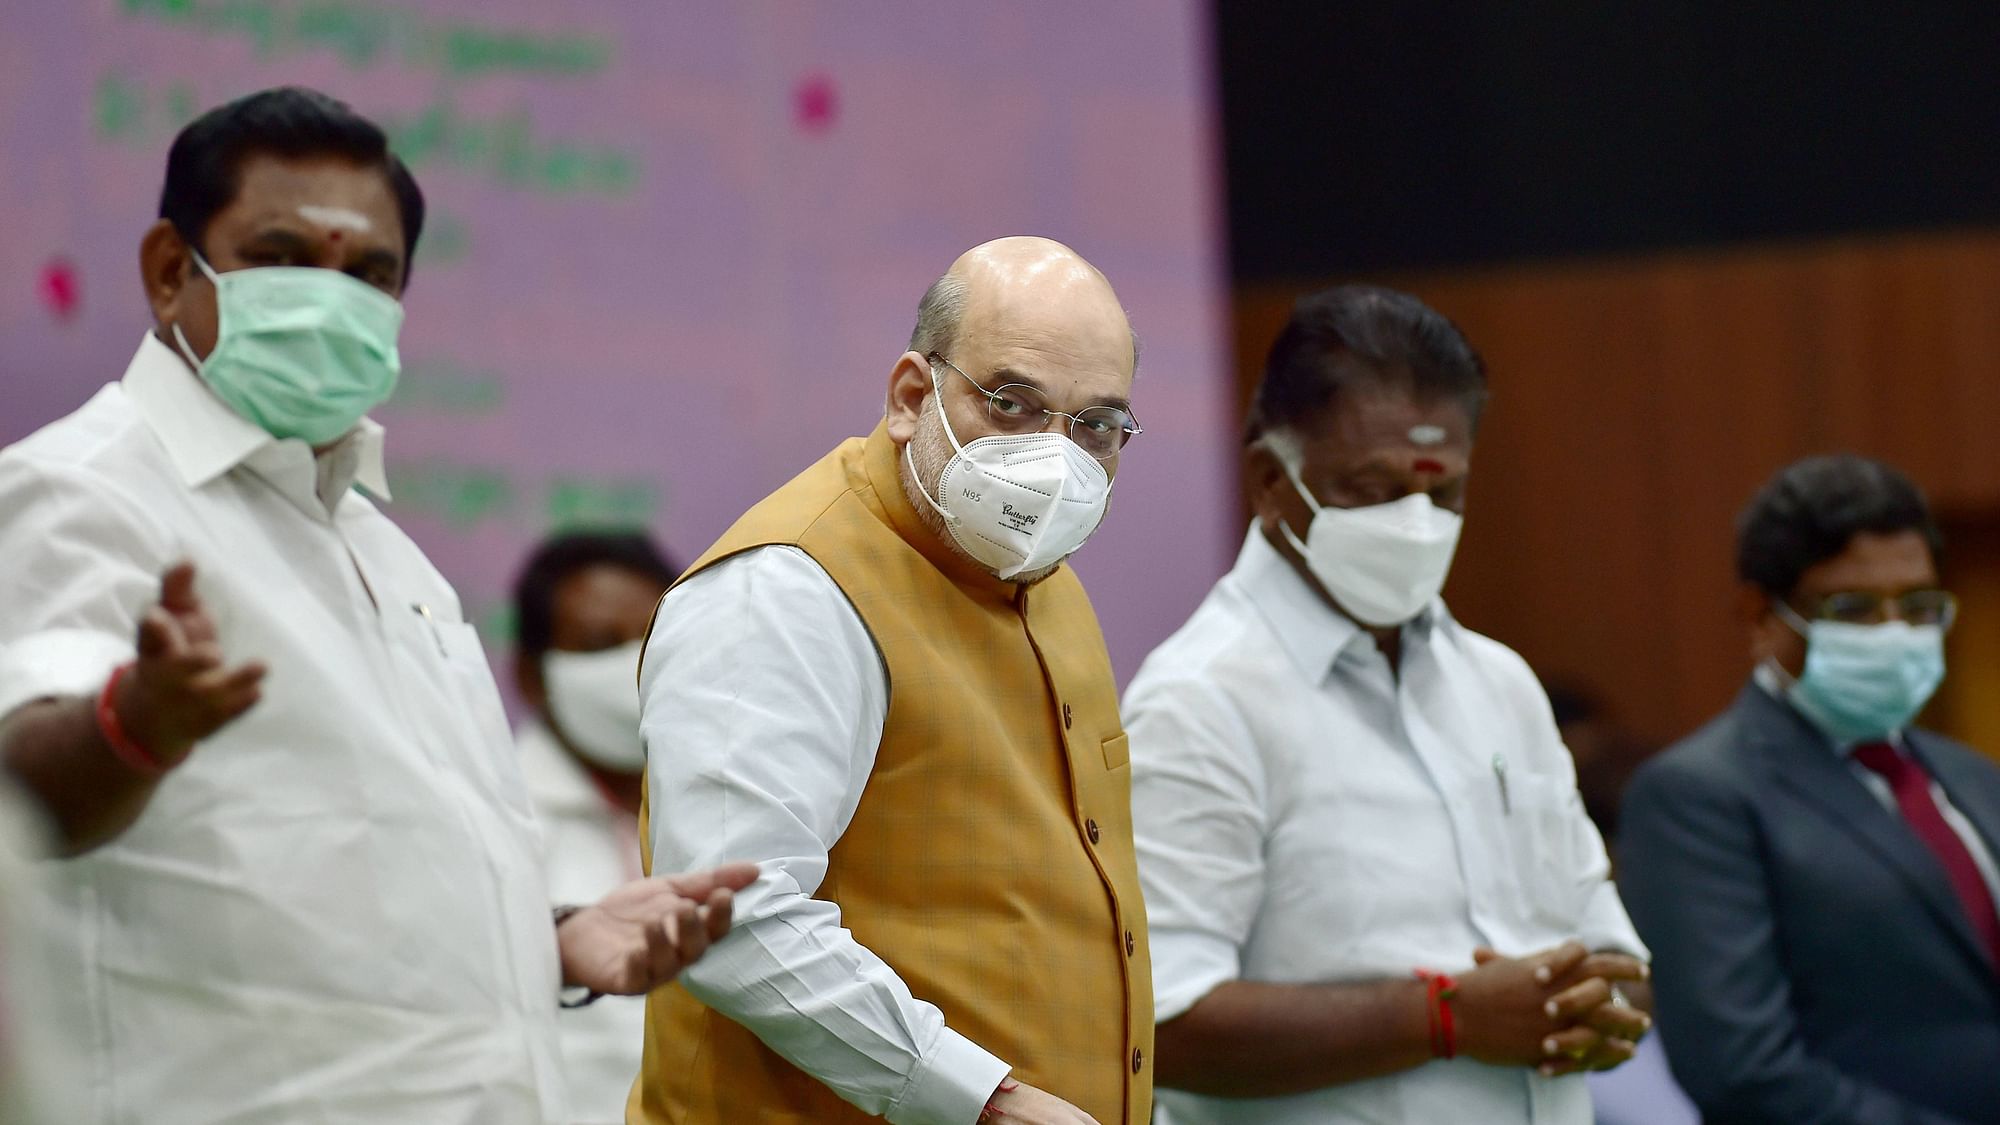 Amit Shah’s visit, first amid the pandemic, comes just months before the state Assembly elections in summer 2021.